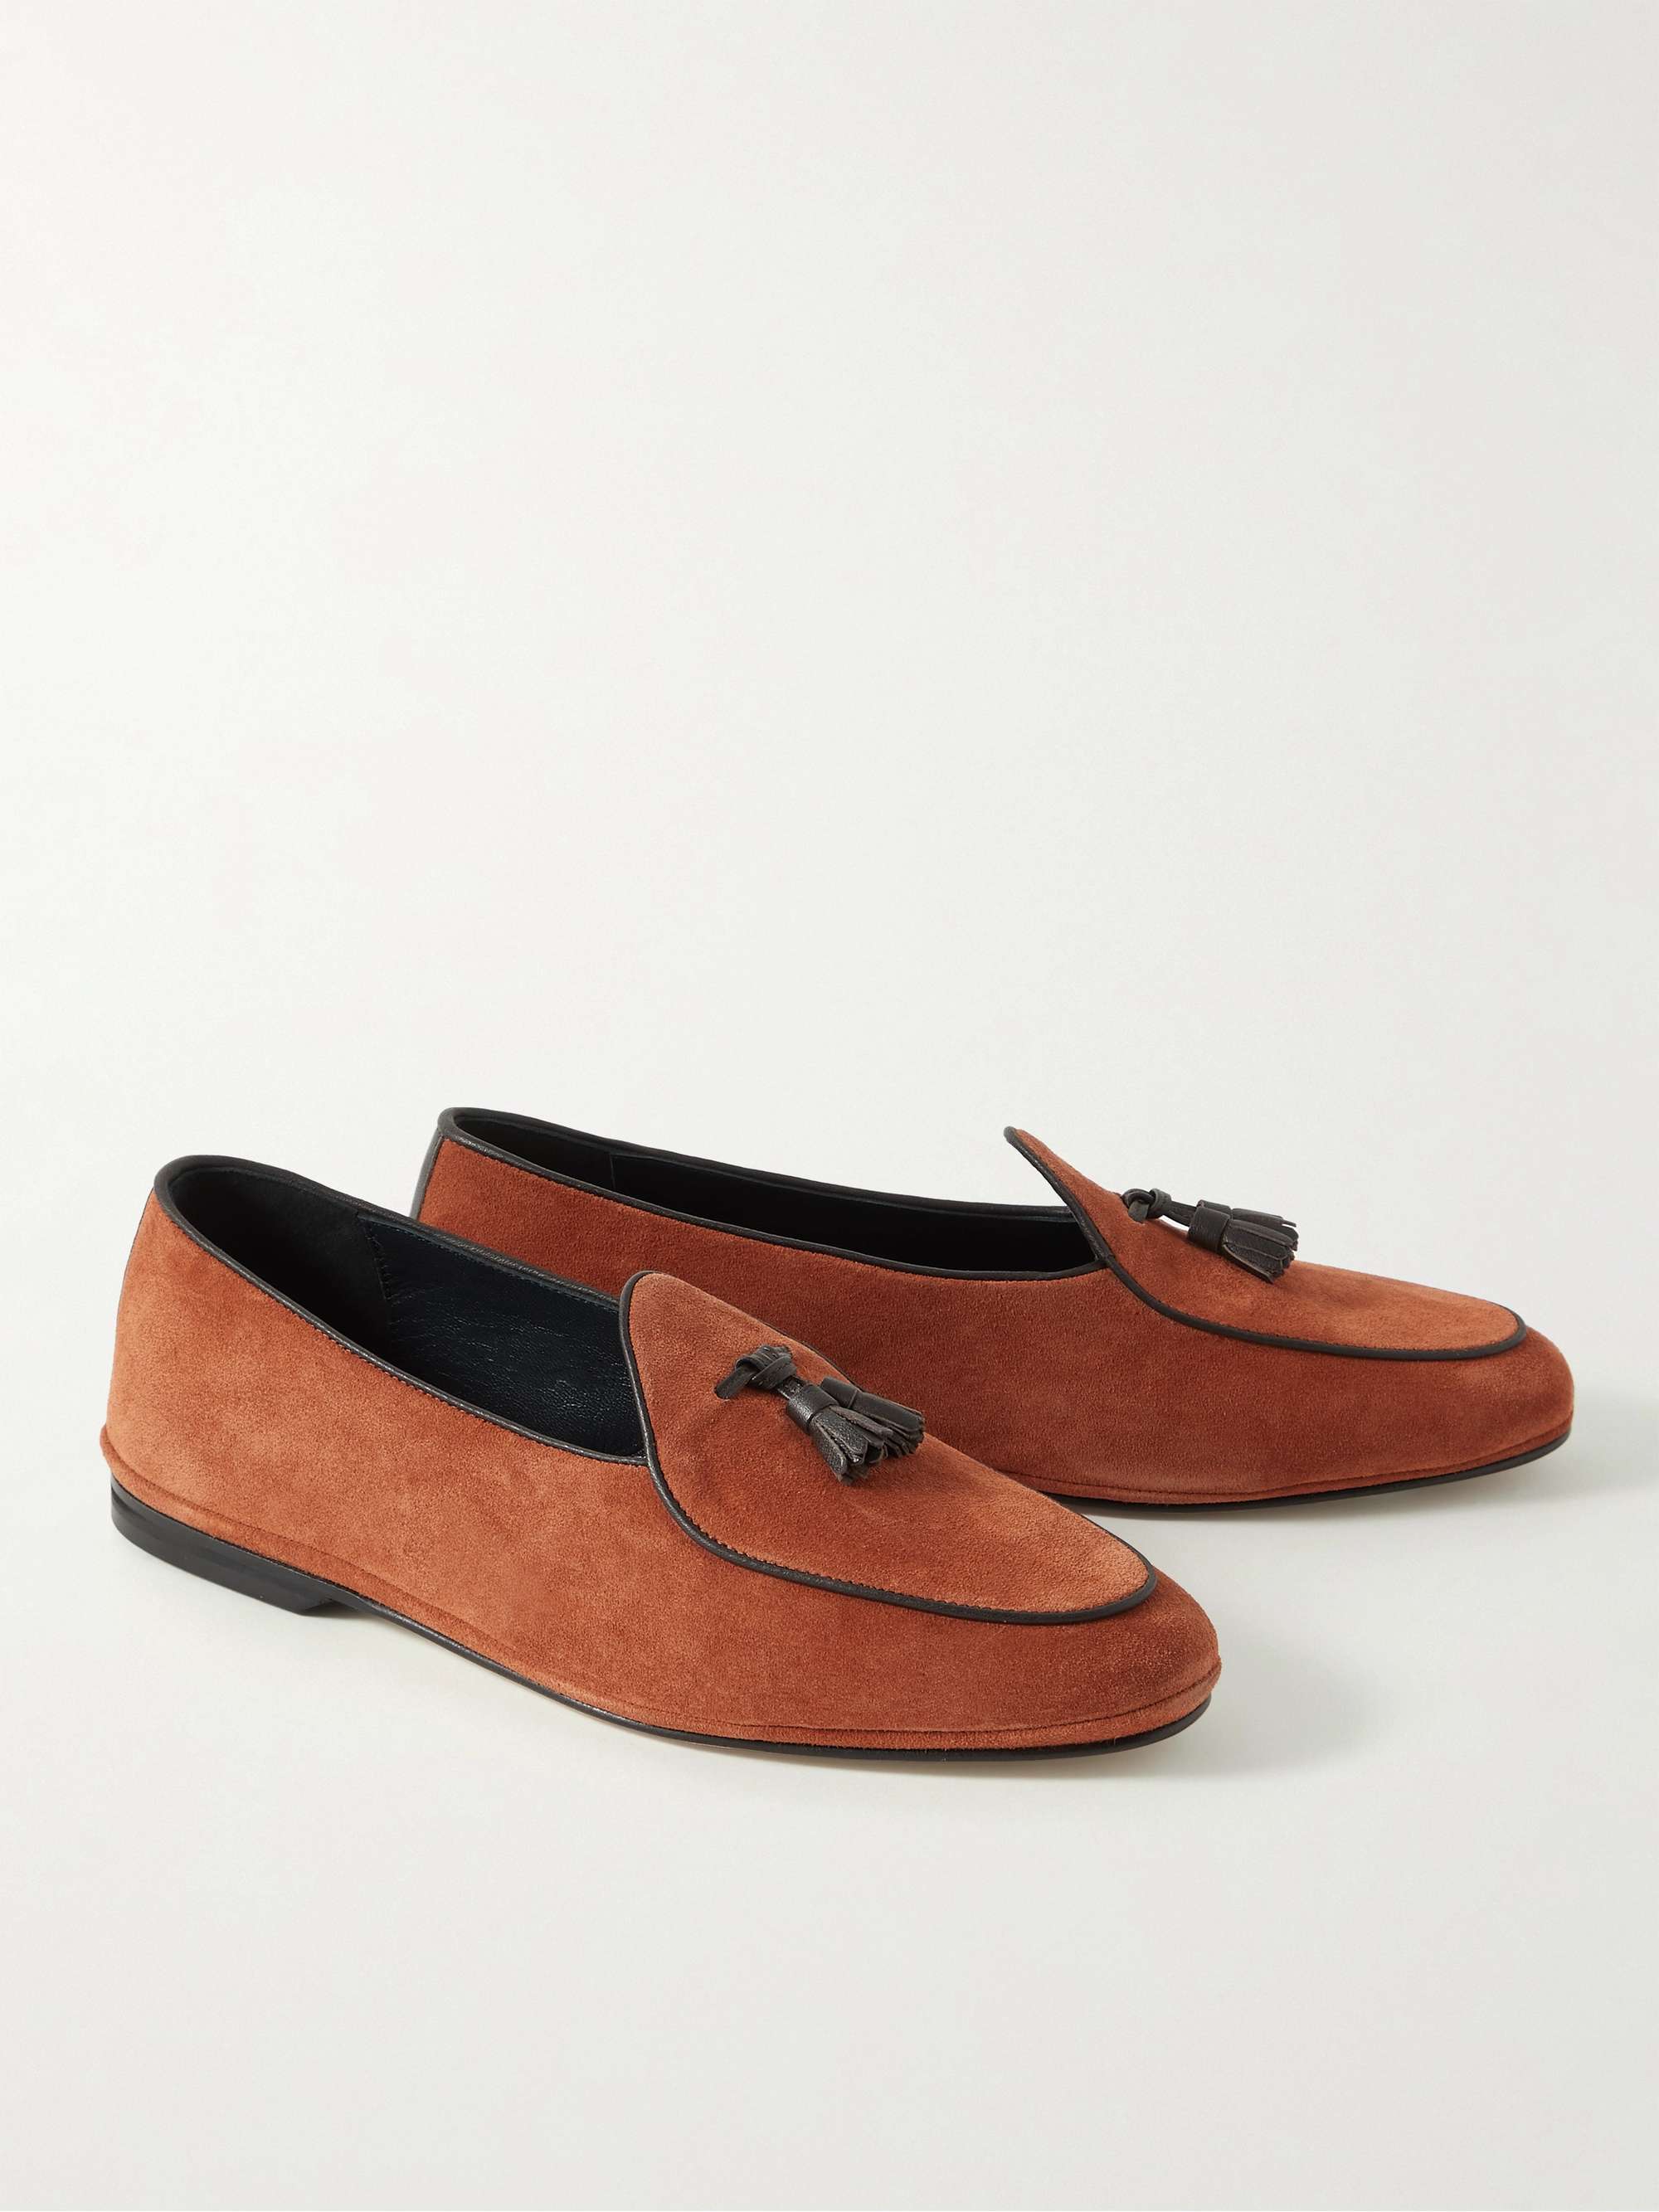 RUBINACCI Marphy Leather-Trimmed Suede Tasselled Loafers